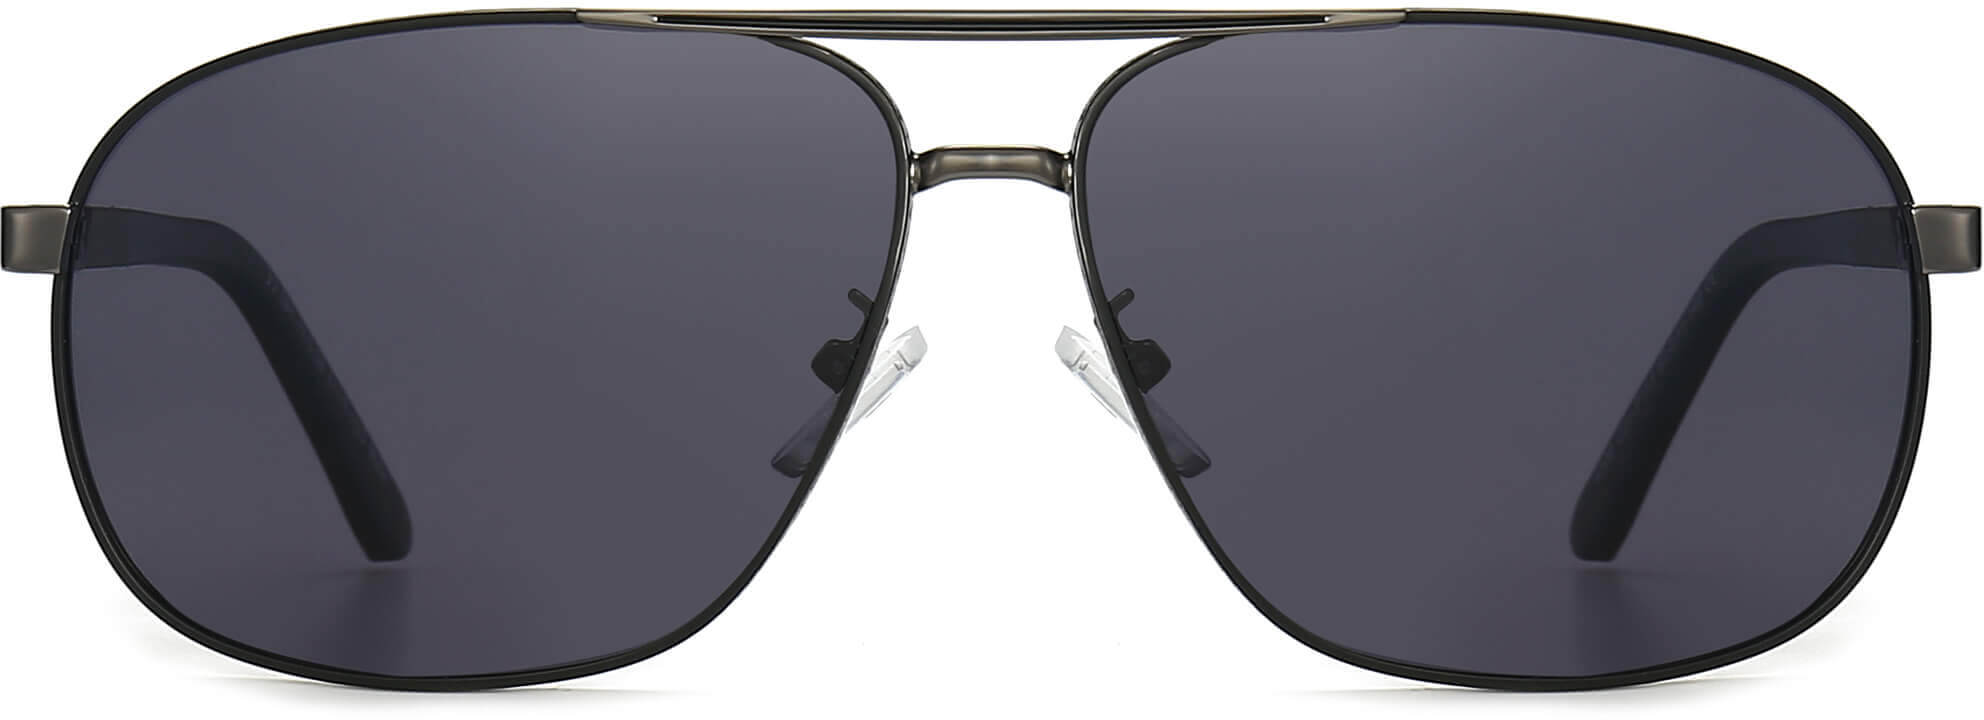 Jia Black Stainless steel Sunglasses from ANRRI